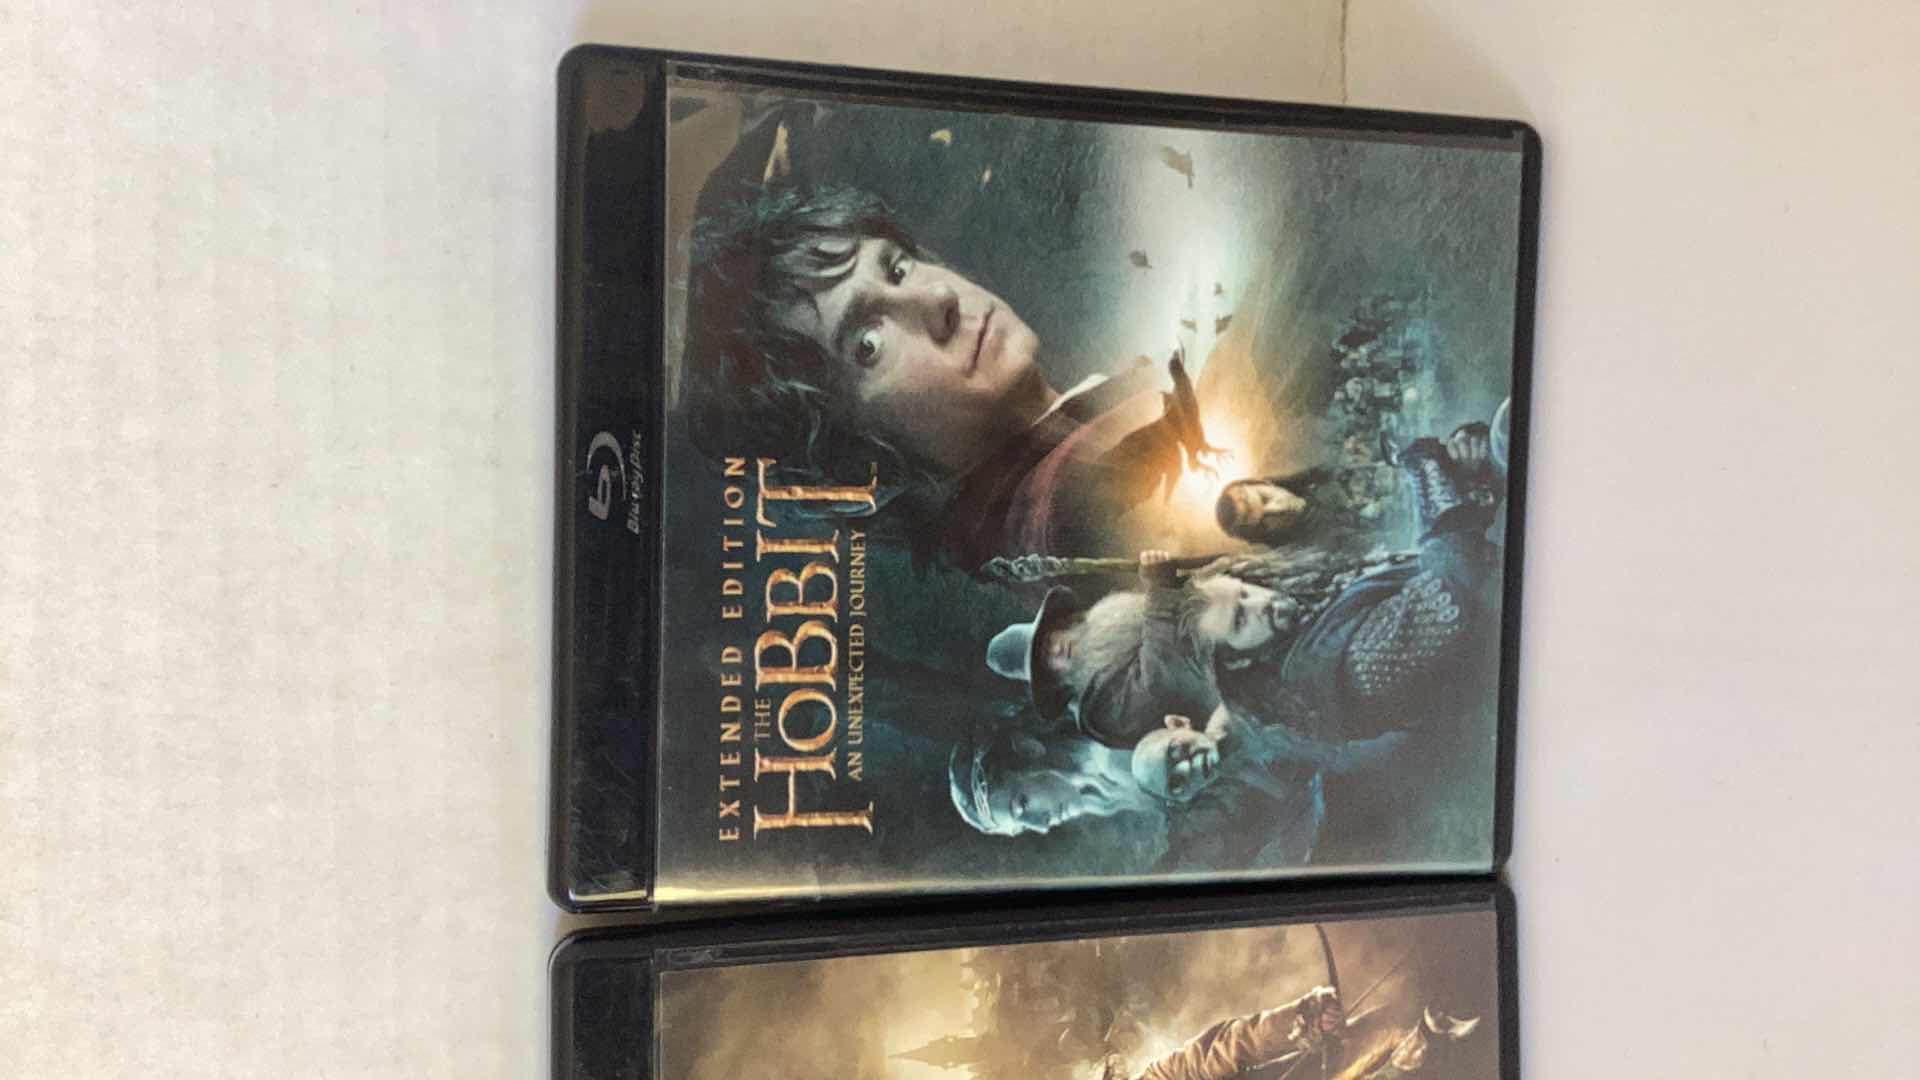 Photo 4 of 3 EXTENDED EDITION HOBBIT MOVIES